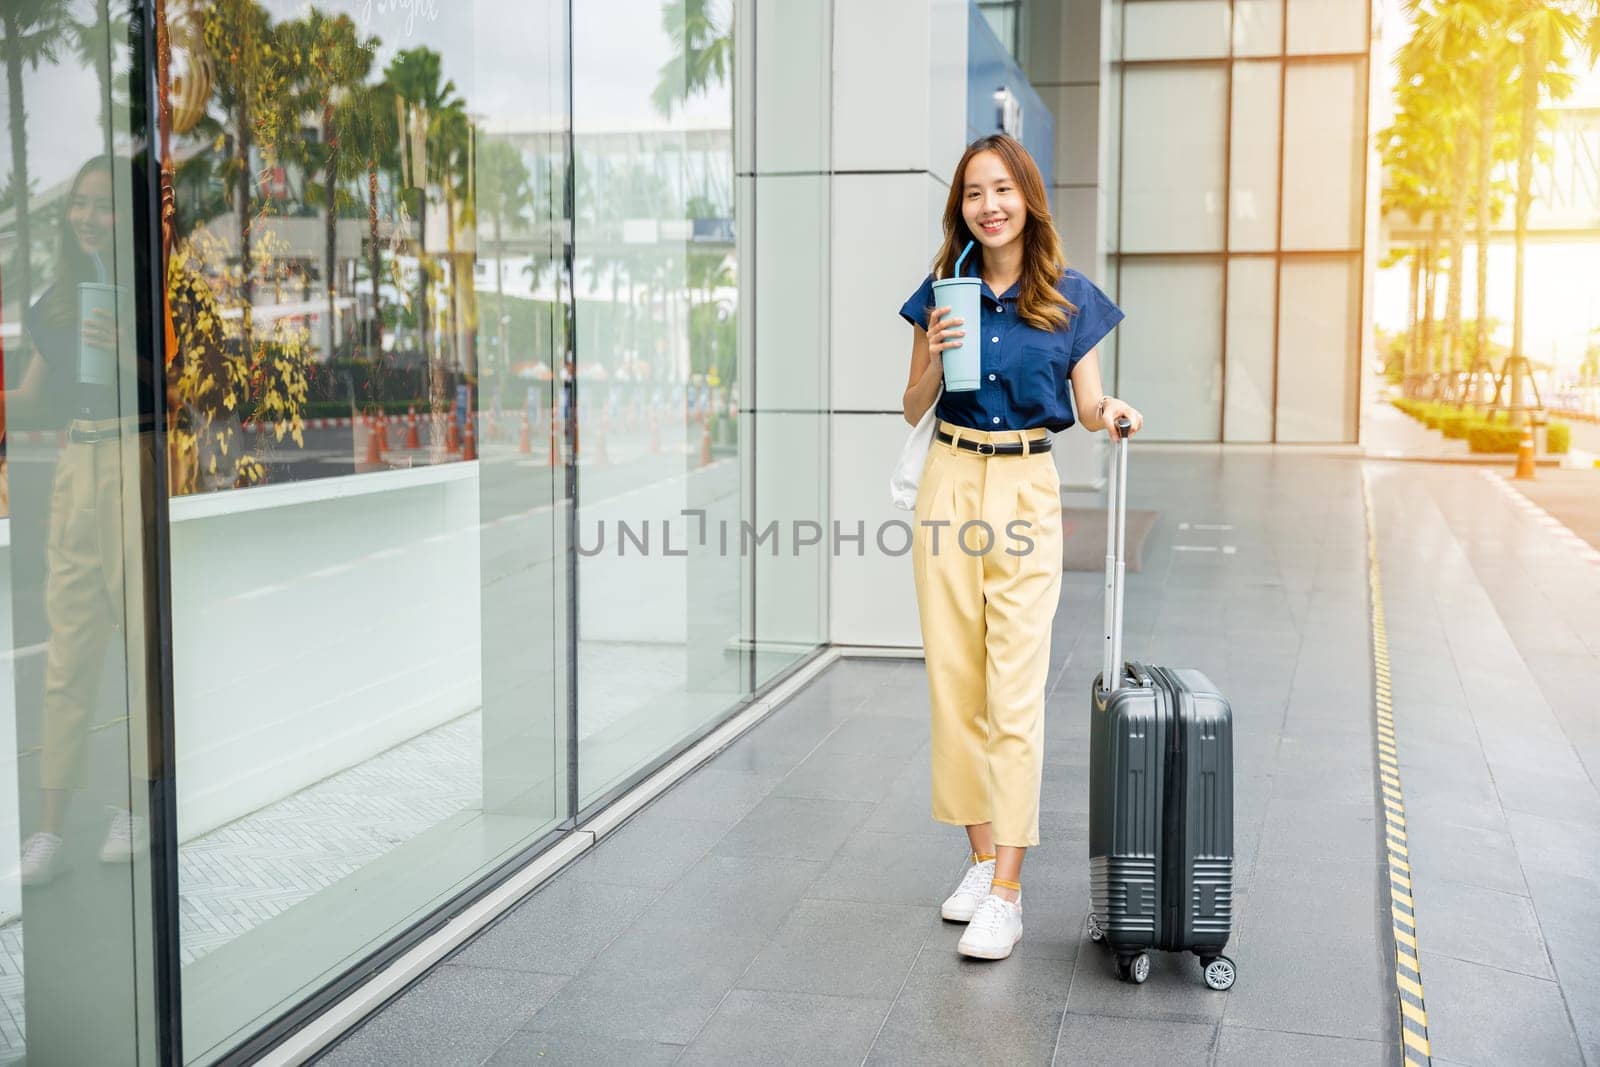 A young Asian woman with a sense of wanderlust holds a glass of water in one hand and her trusty suitcase in the other. Ready for travel, she sets off on her journey.